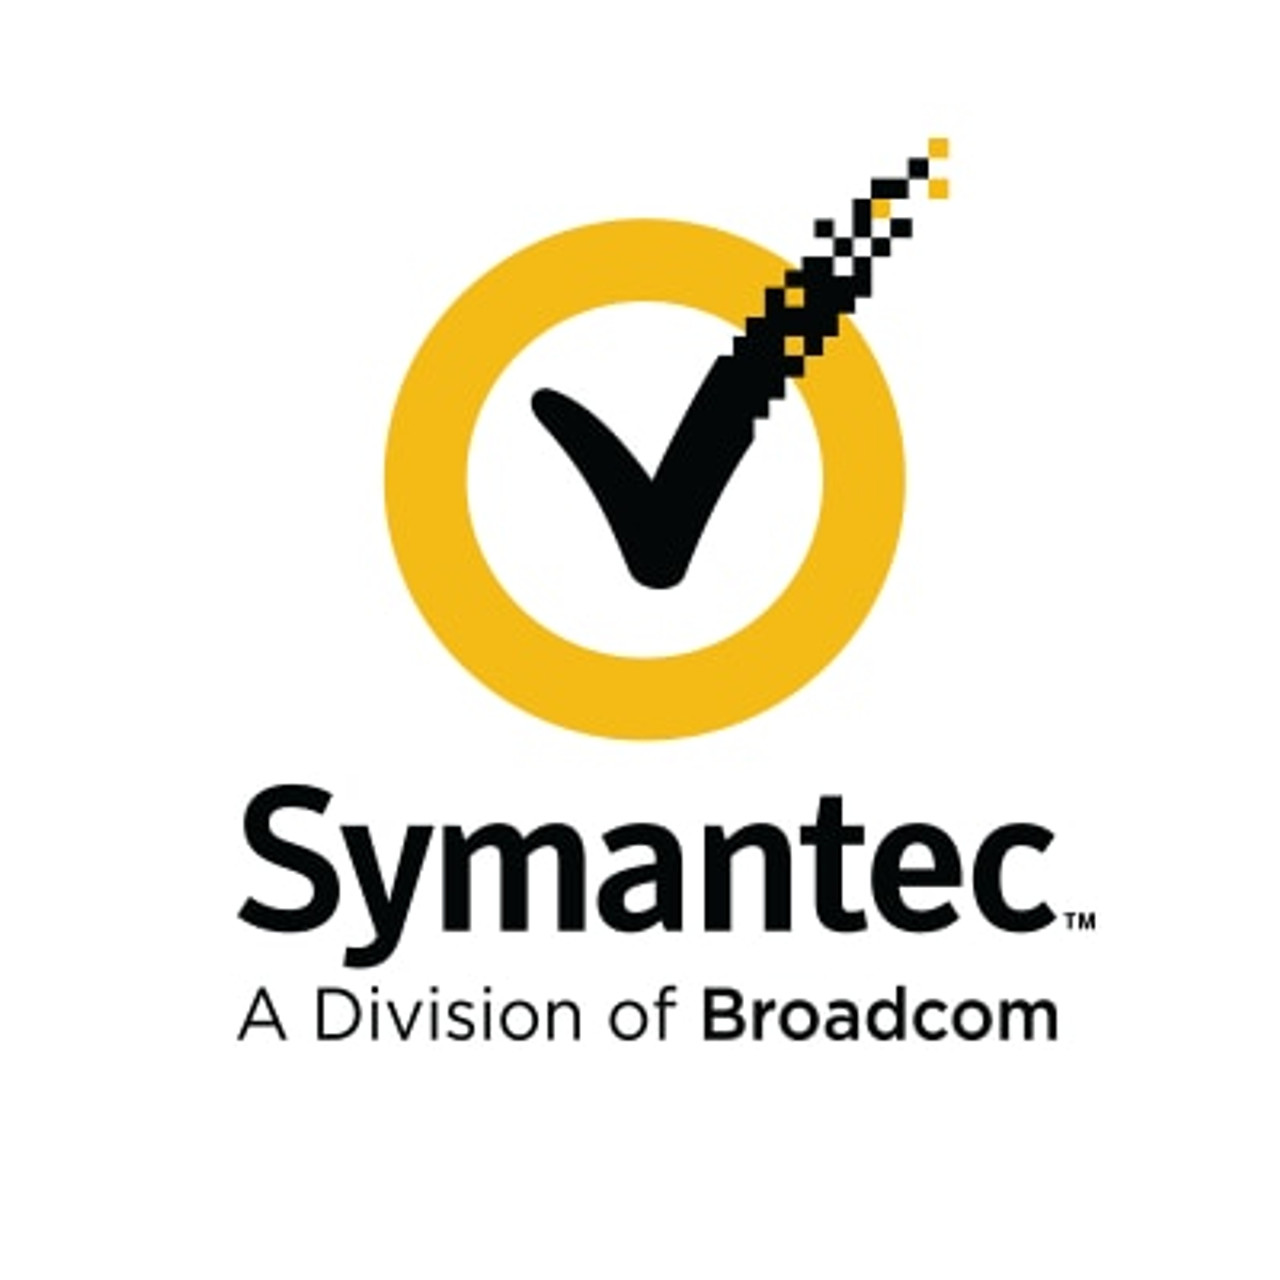 Symantec Complete Endpoint Defense (without SEP), Initial Hybrid Subscription License with Support, 25-49 Devices 1 YR